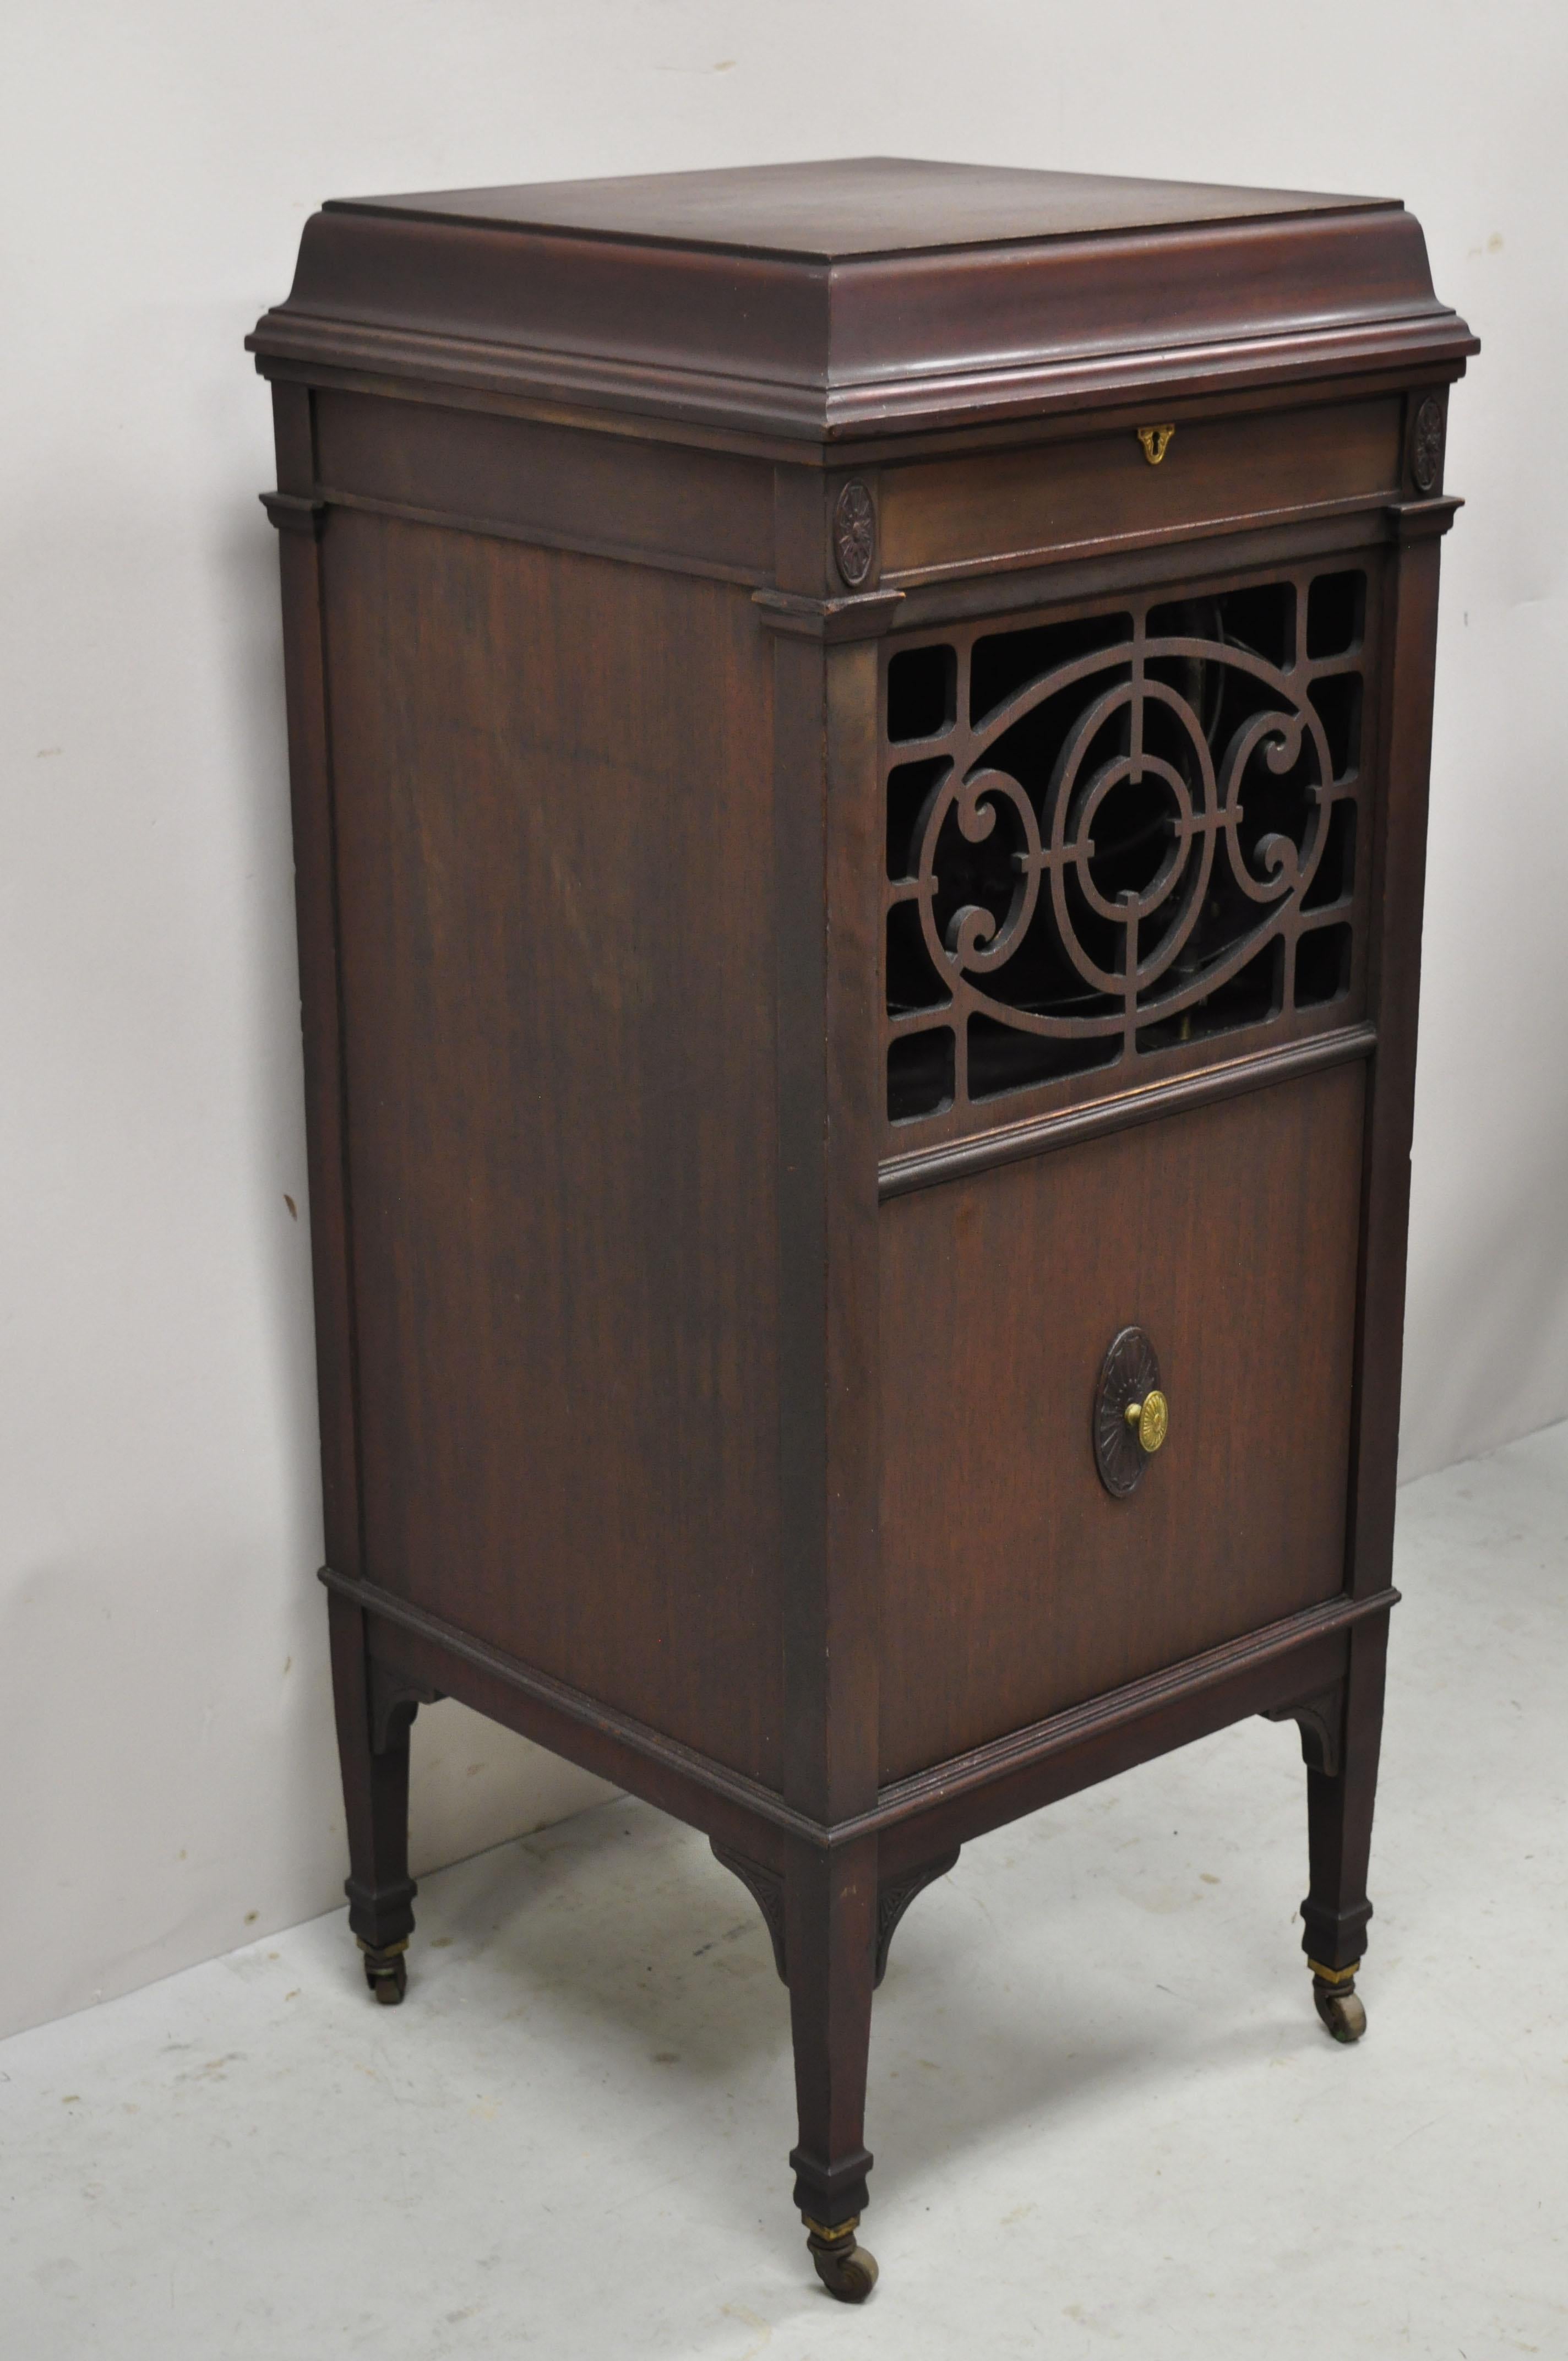 Antique Edison Disc Phonograph Model C 200 Victrola Record Player cabinet. Item features mahogany case, original label, crank included, very nice antique item. Circa Early 1900s. Measurements: 47.5